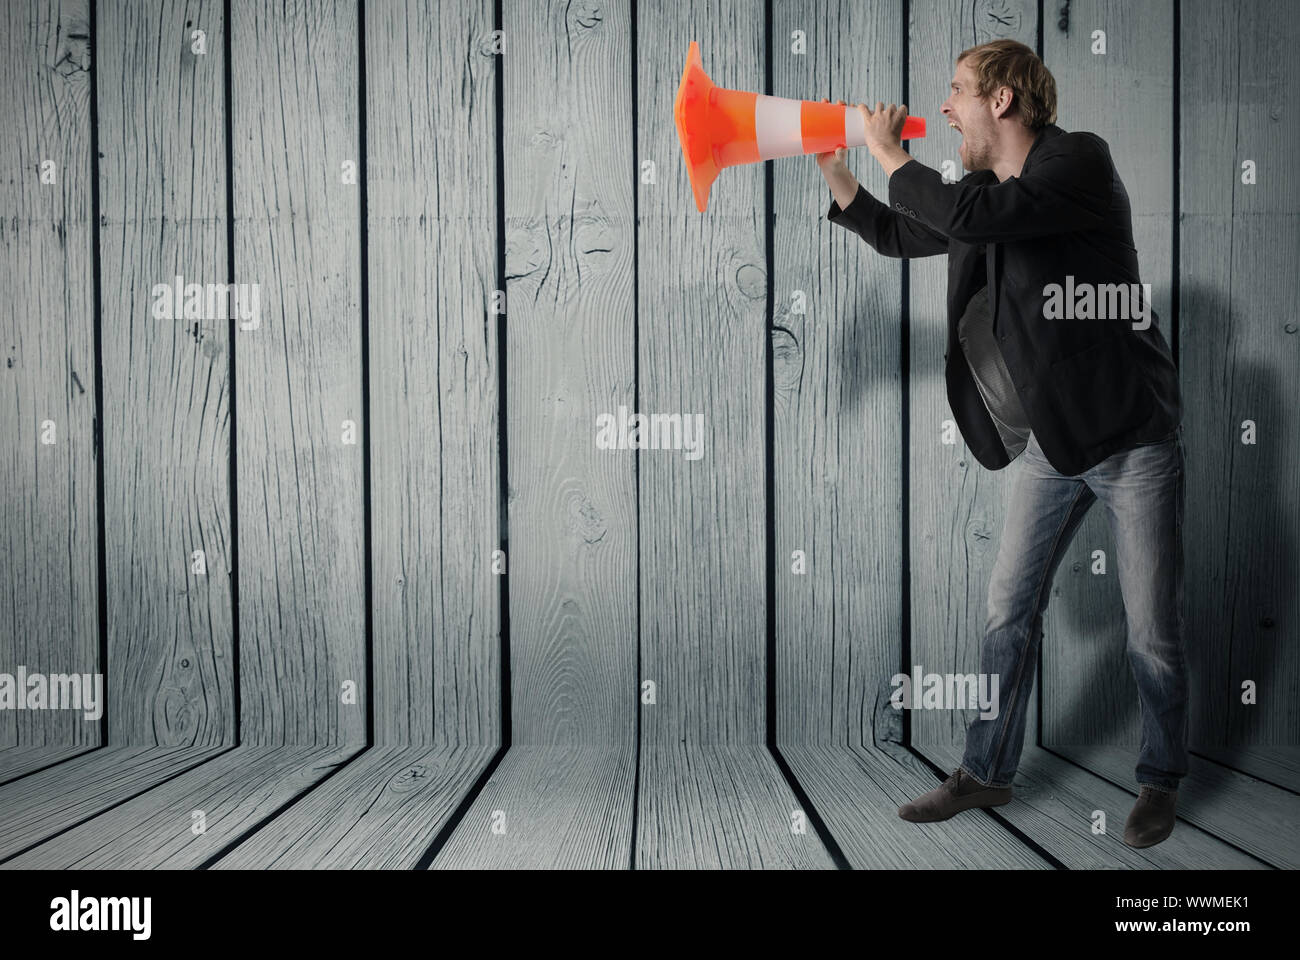 Man uses a warning cone as a megaphone Stock Photo